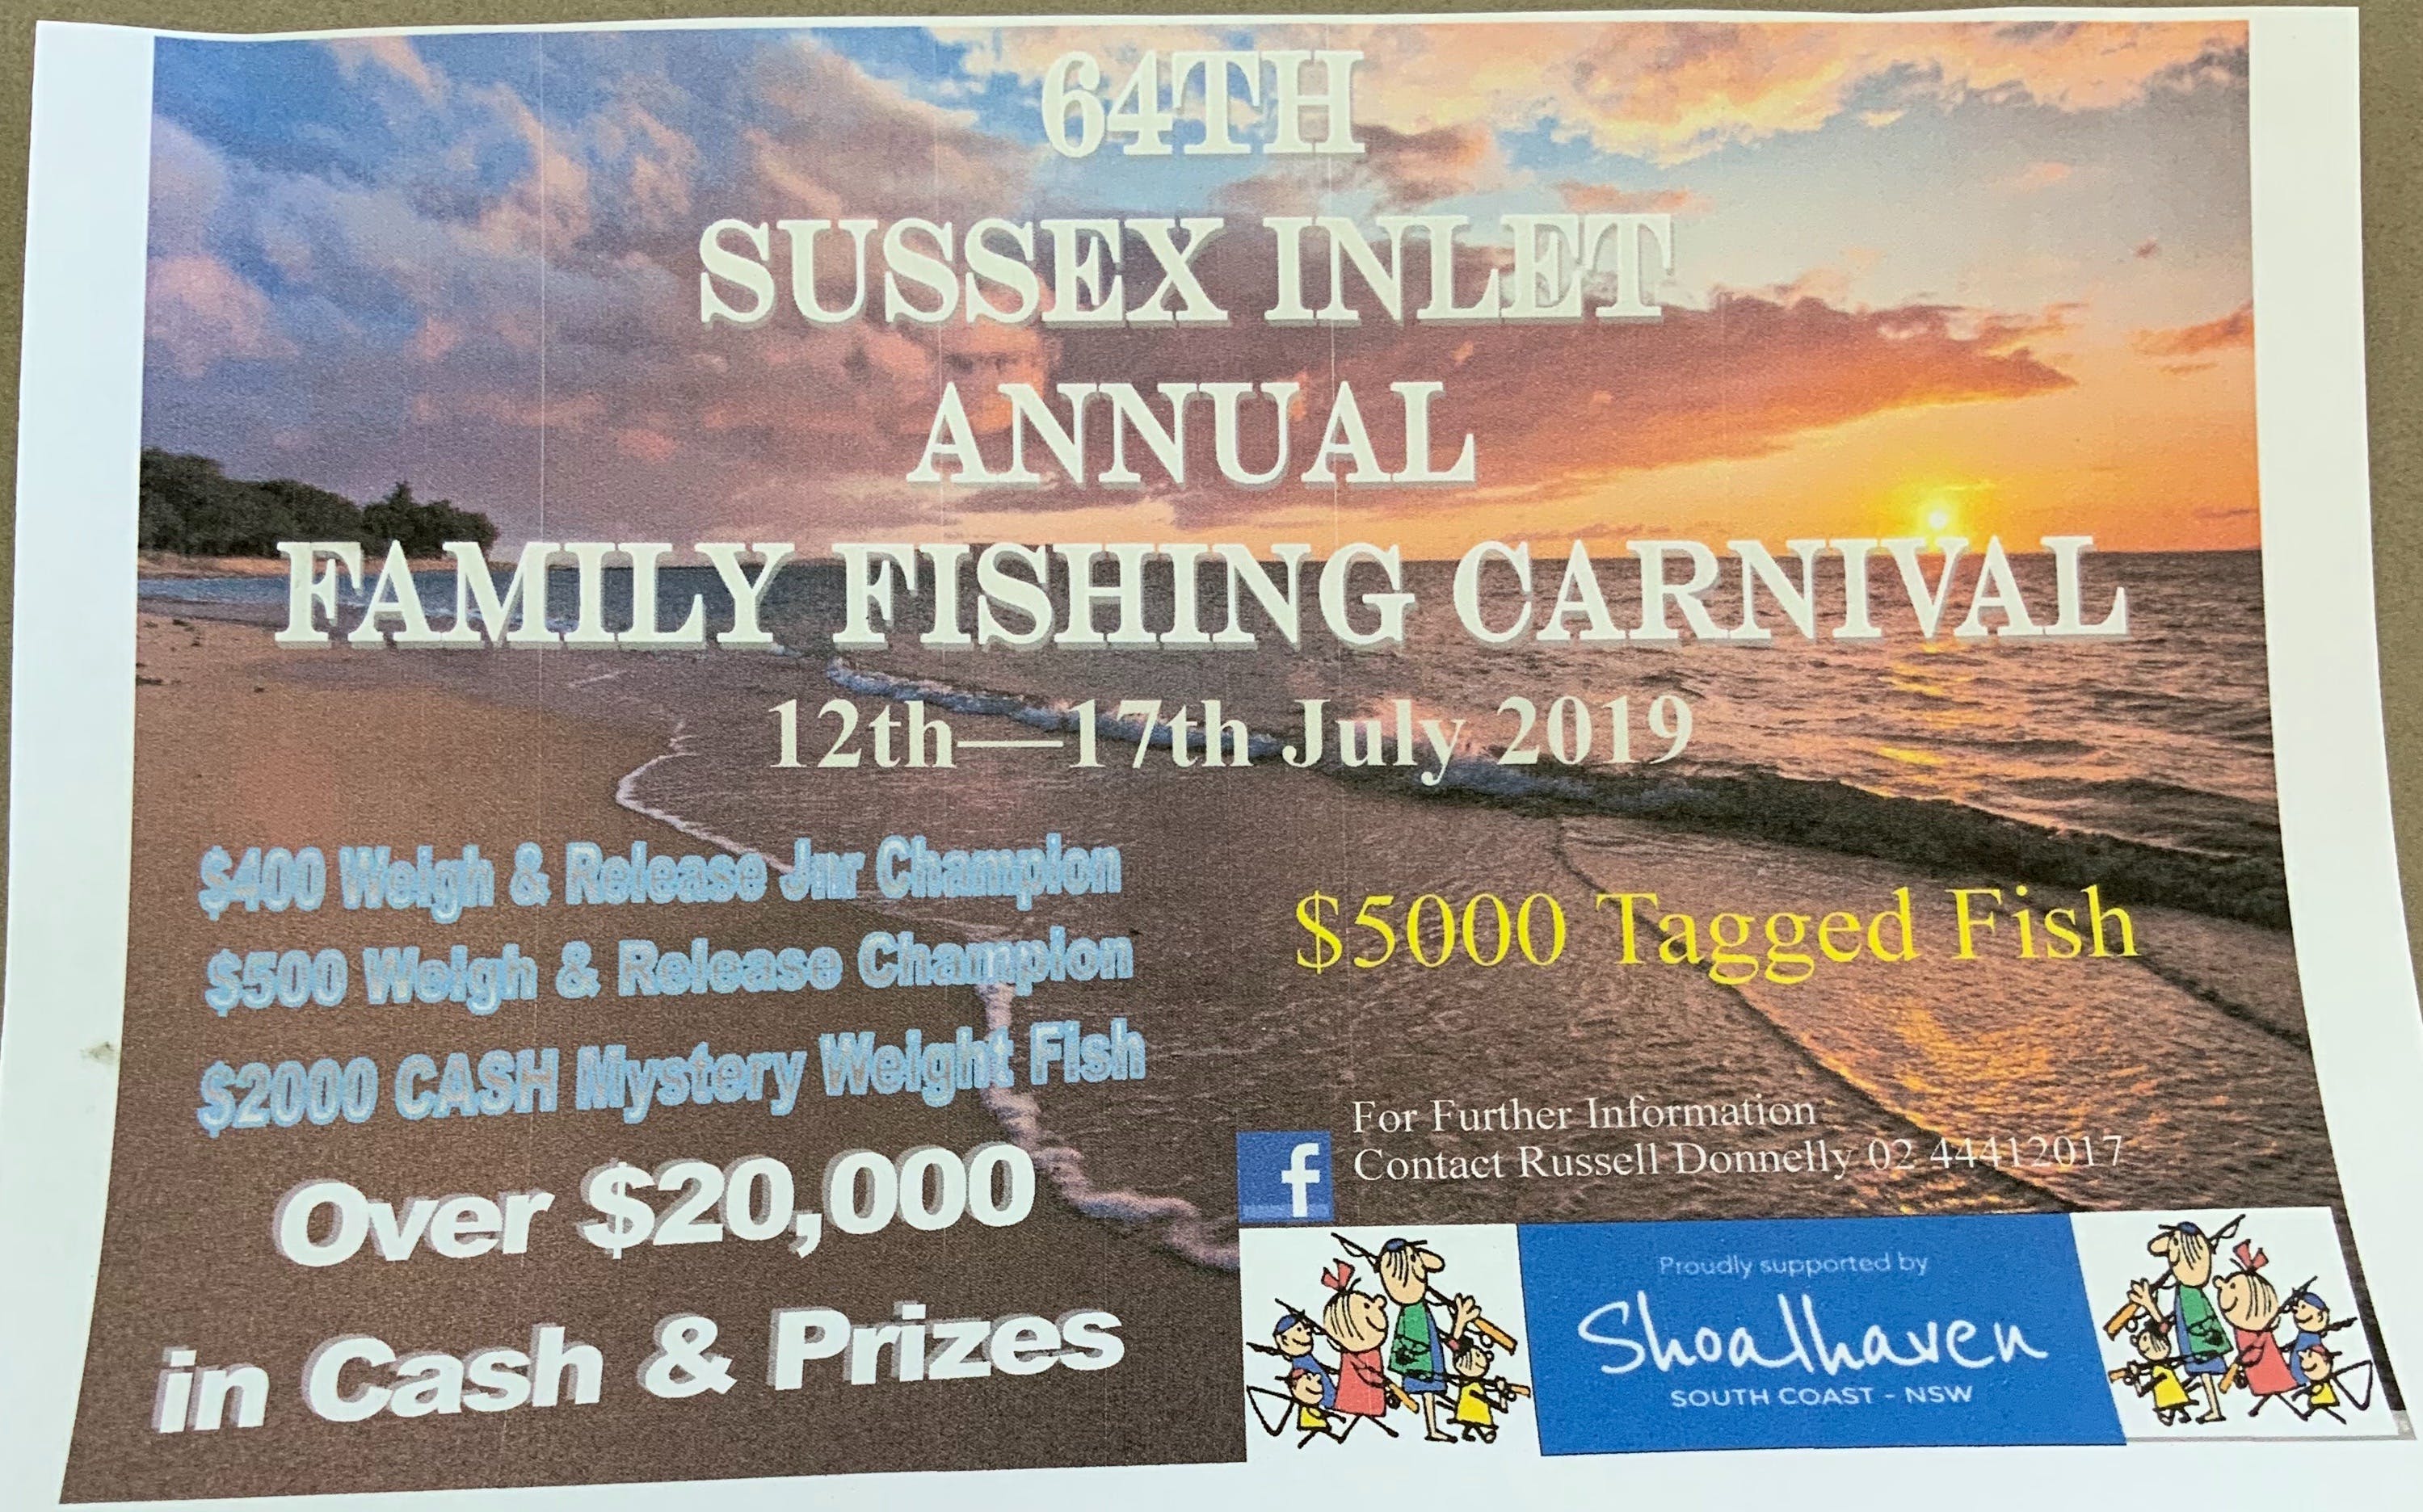 The Sussex Inlet Annual Family Fishing Carnival - Broome Tourism